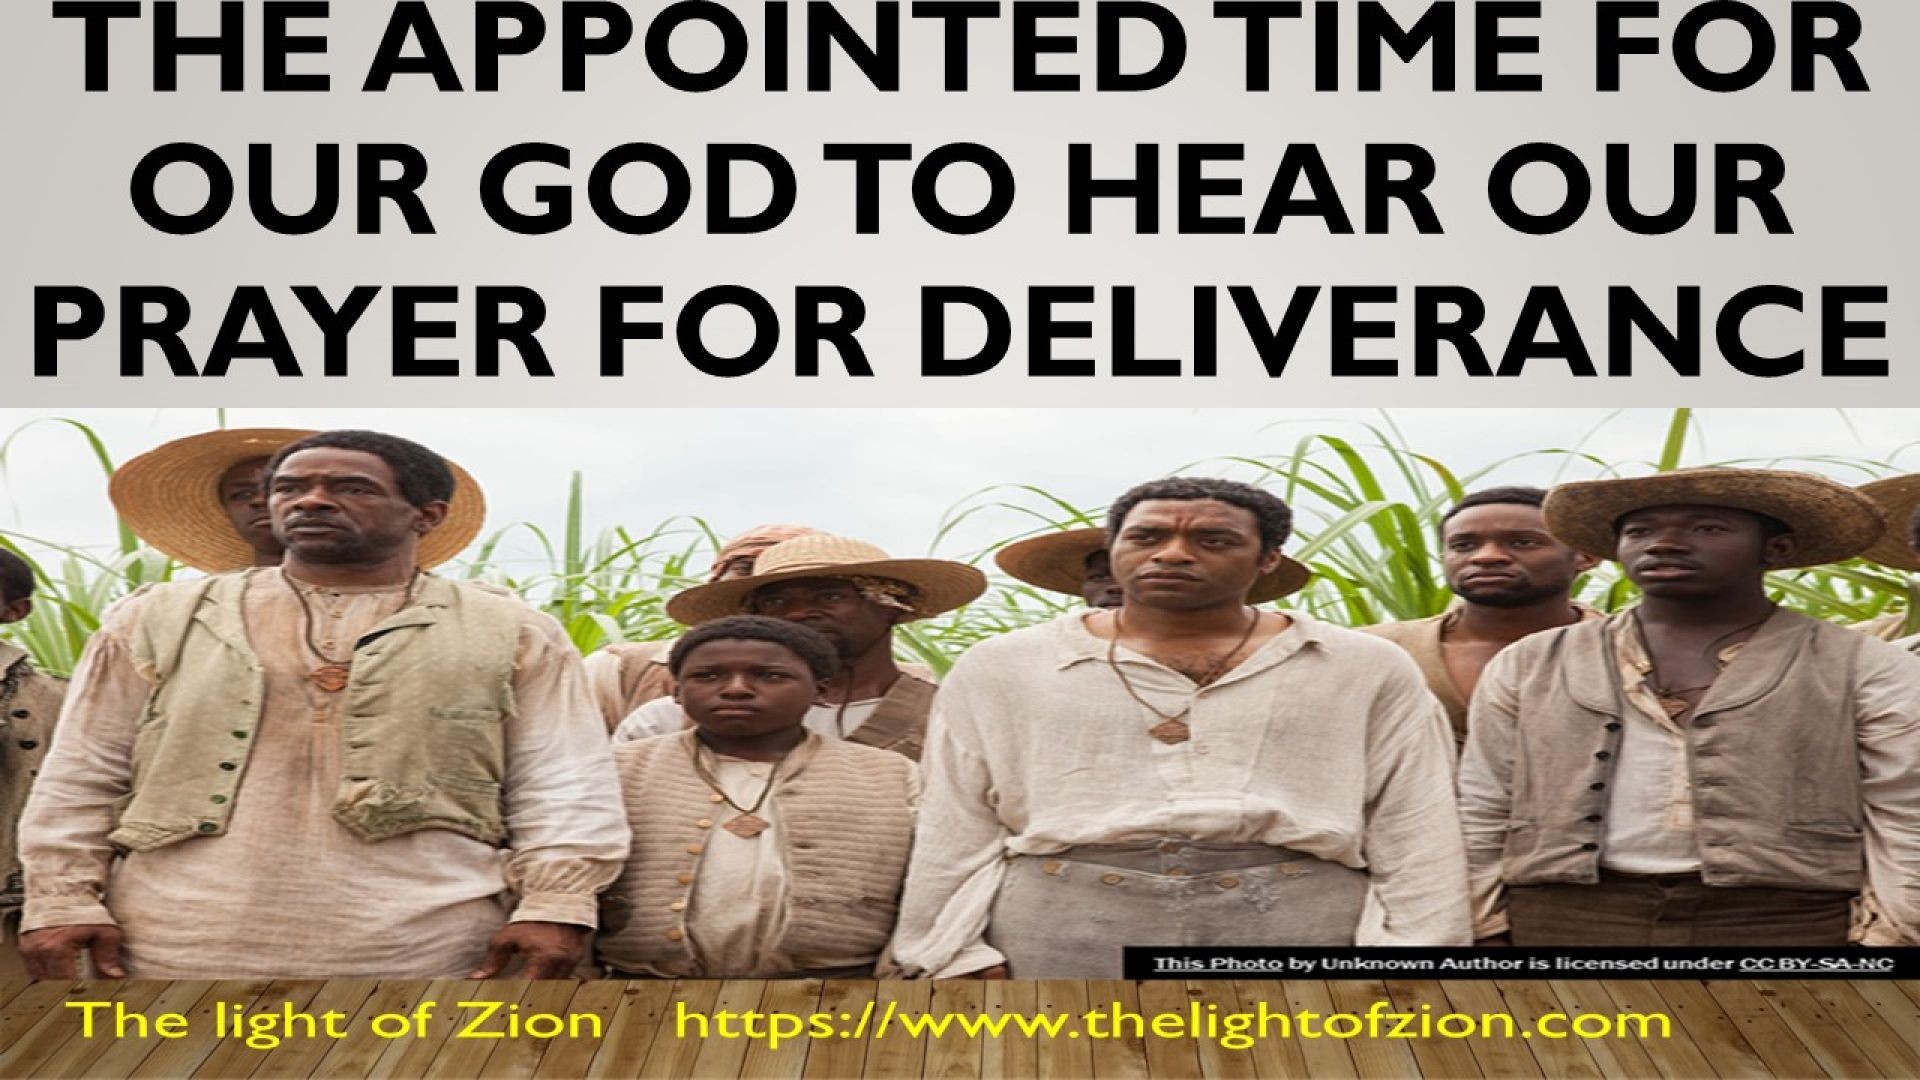 The appointed time for our God to hear our prayer for deliverance